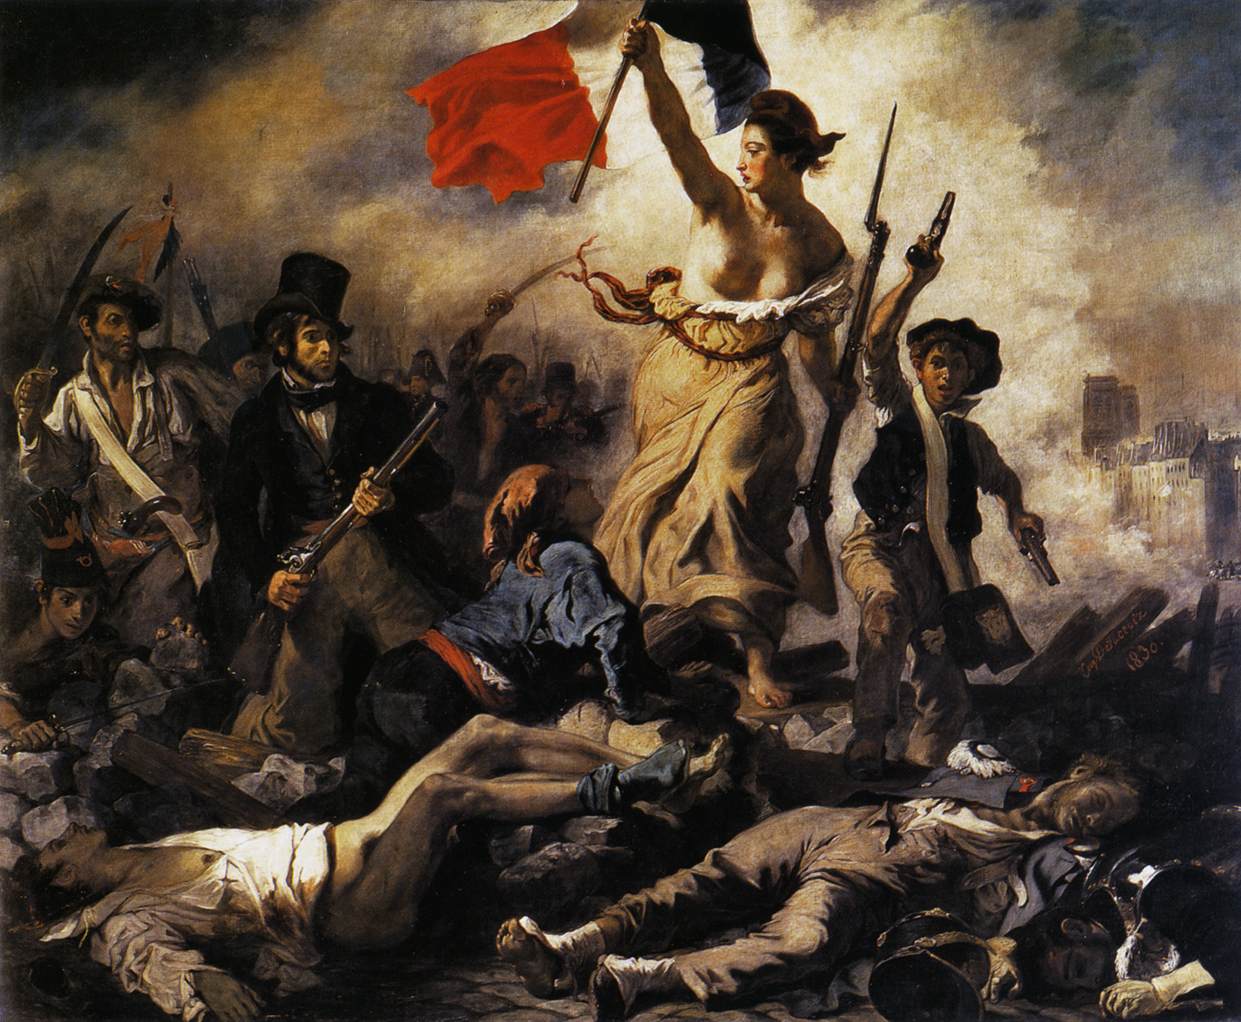 Painting showing allegory of LIberty